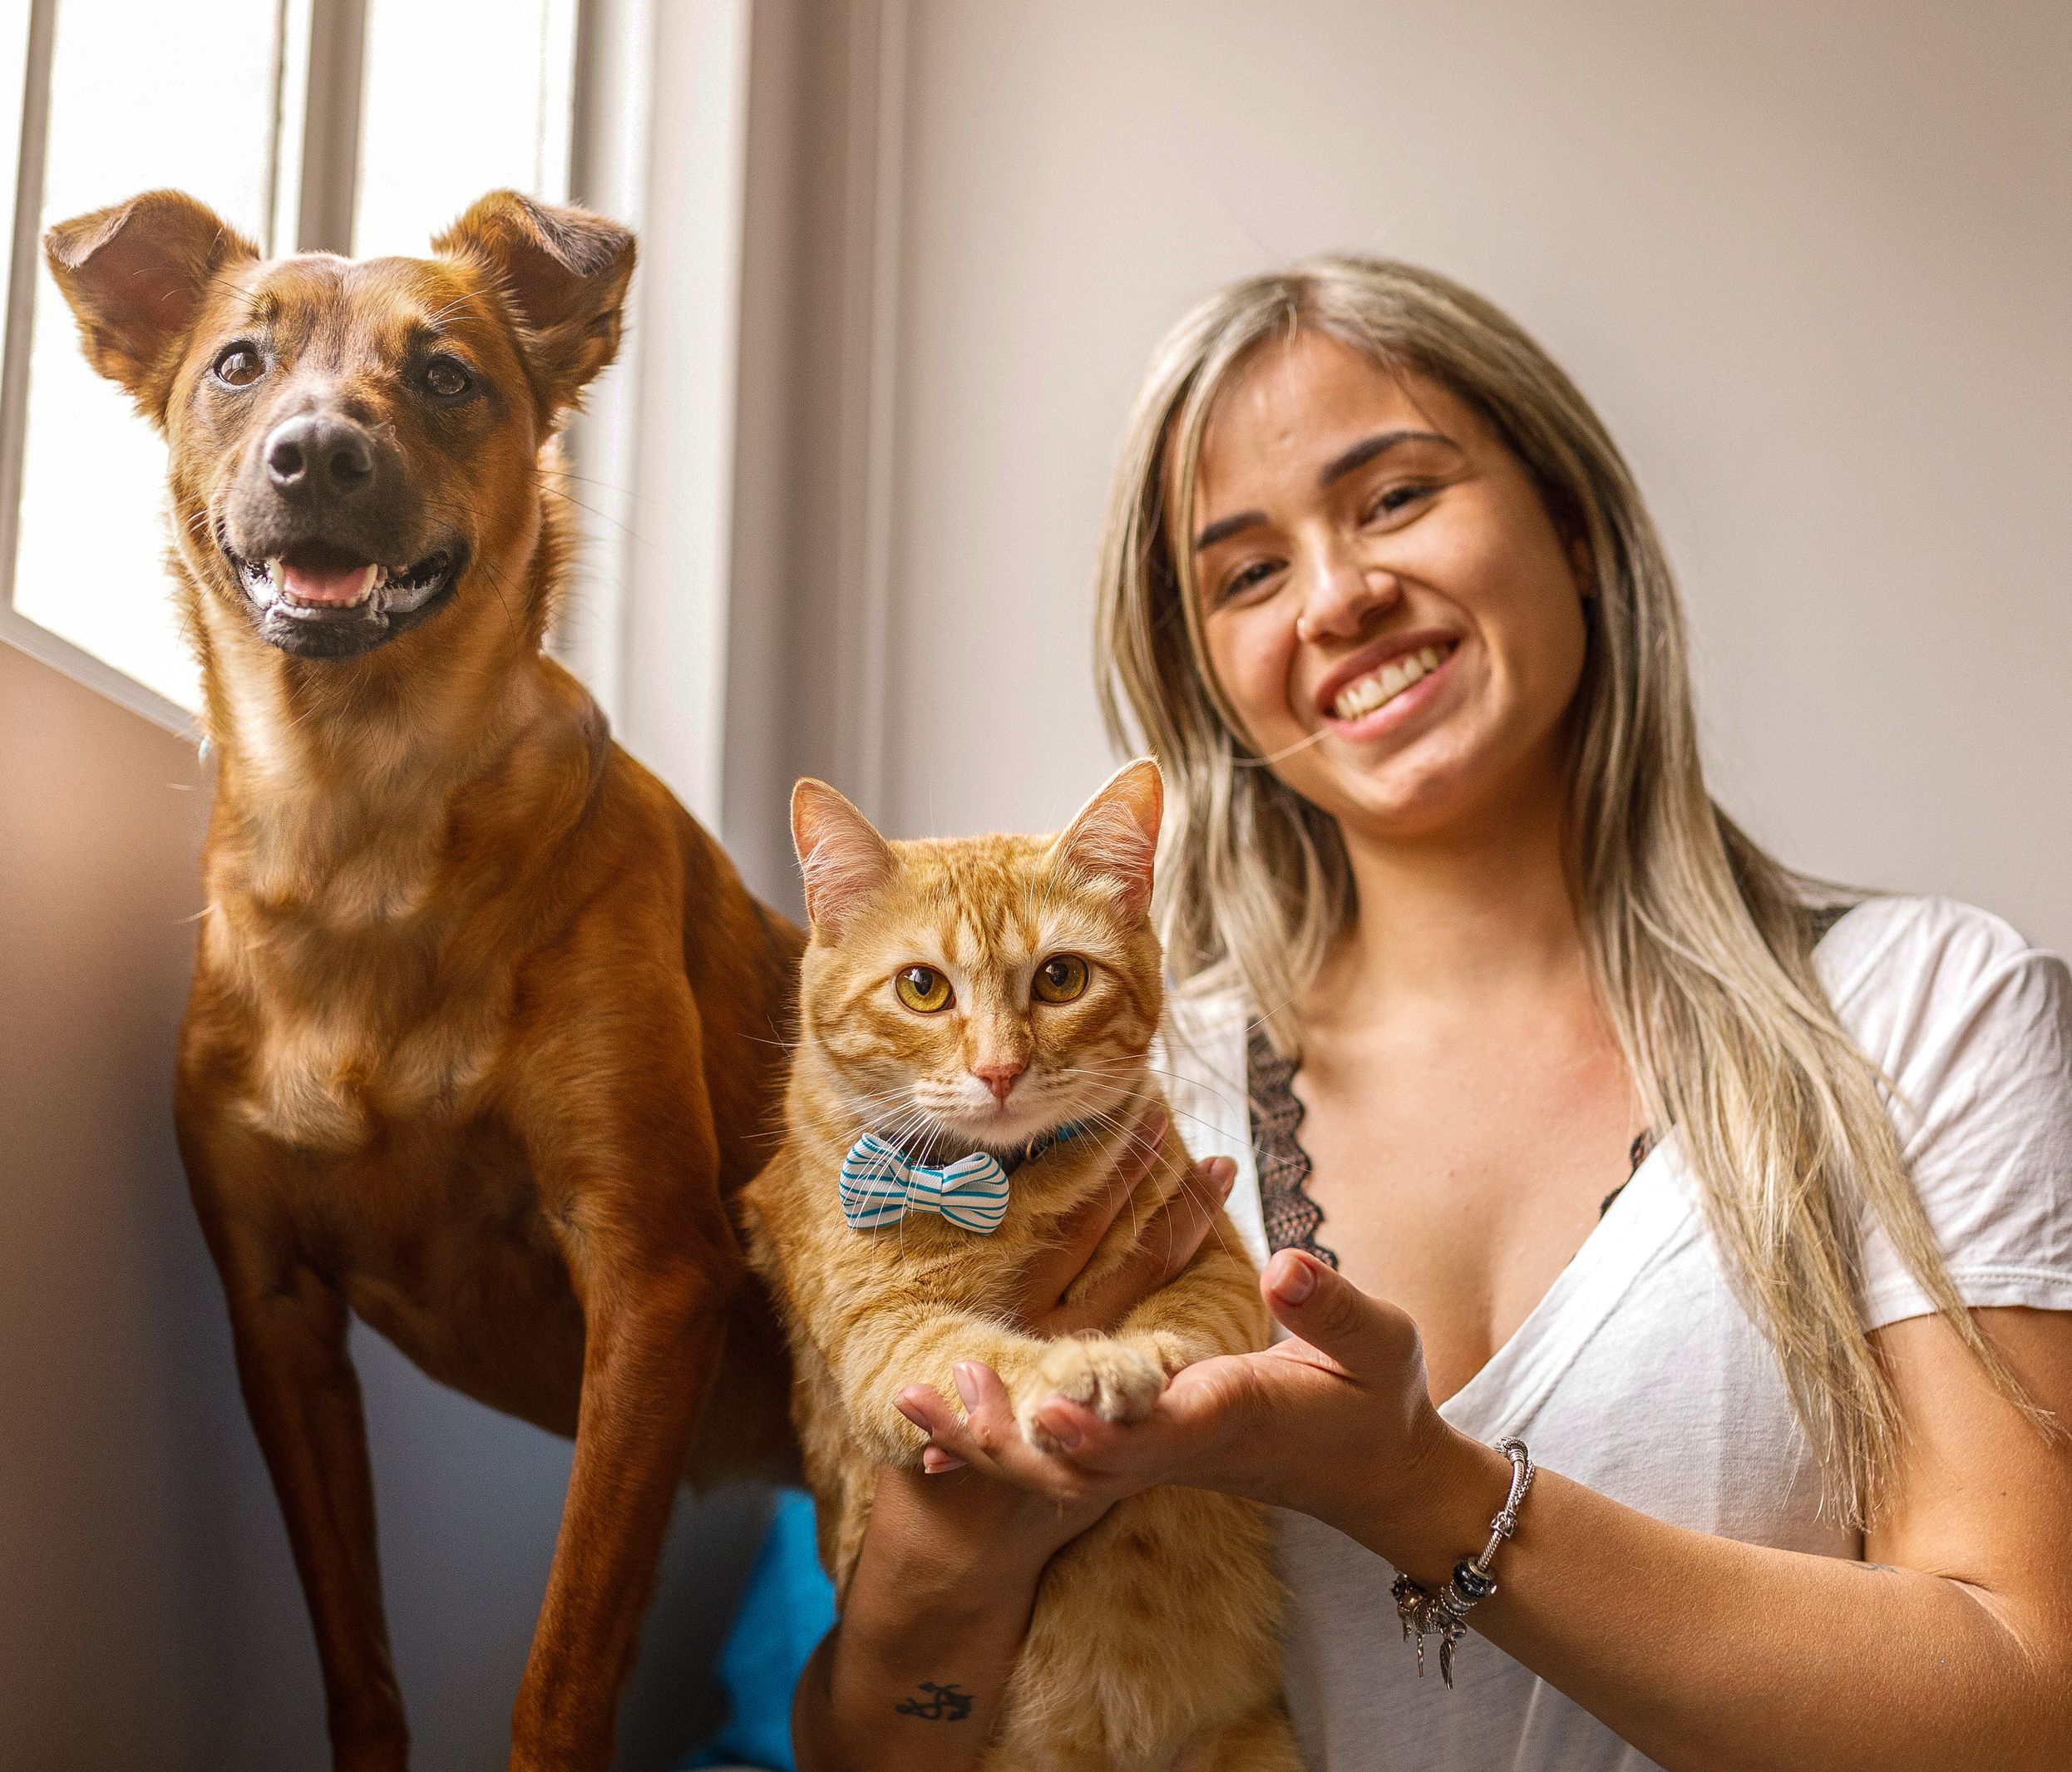 A woman sitting close to a window with a dog and cat beside her. The cat is wearing a cute bow collar and the woman is holding its paws.